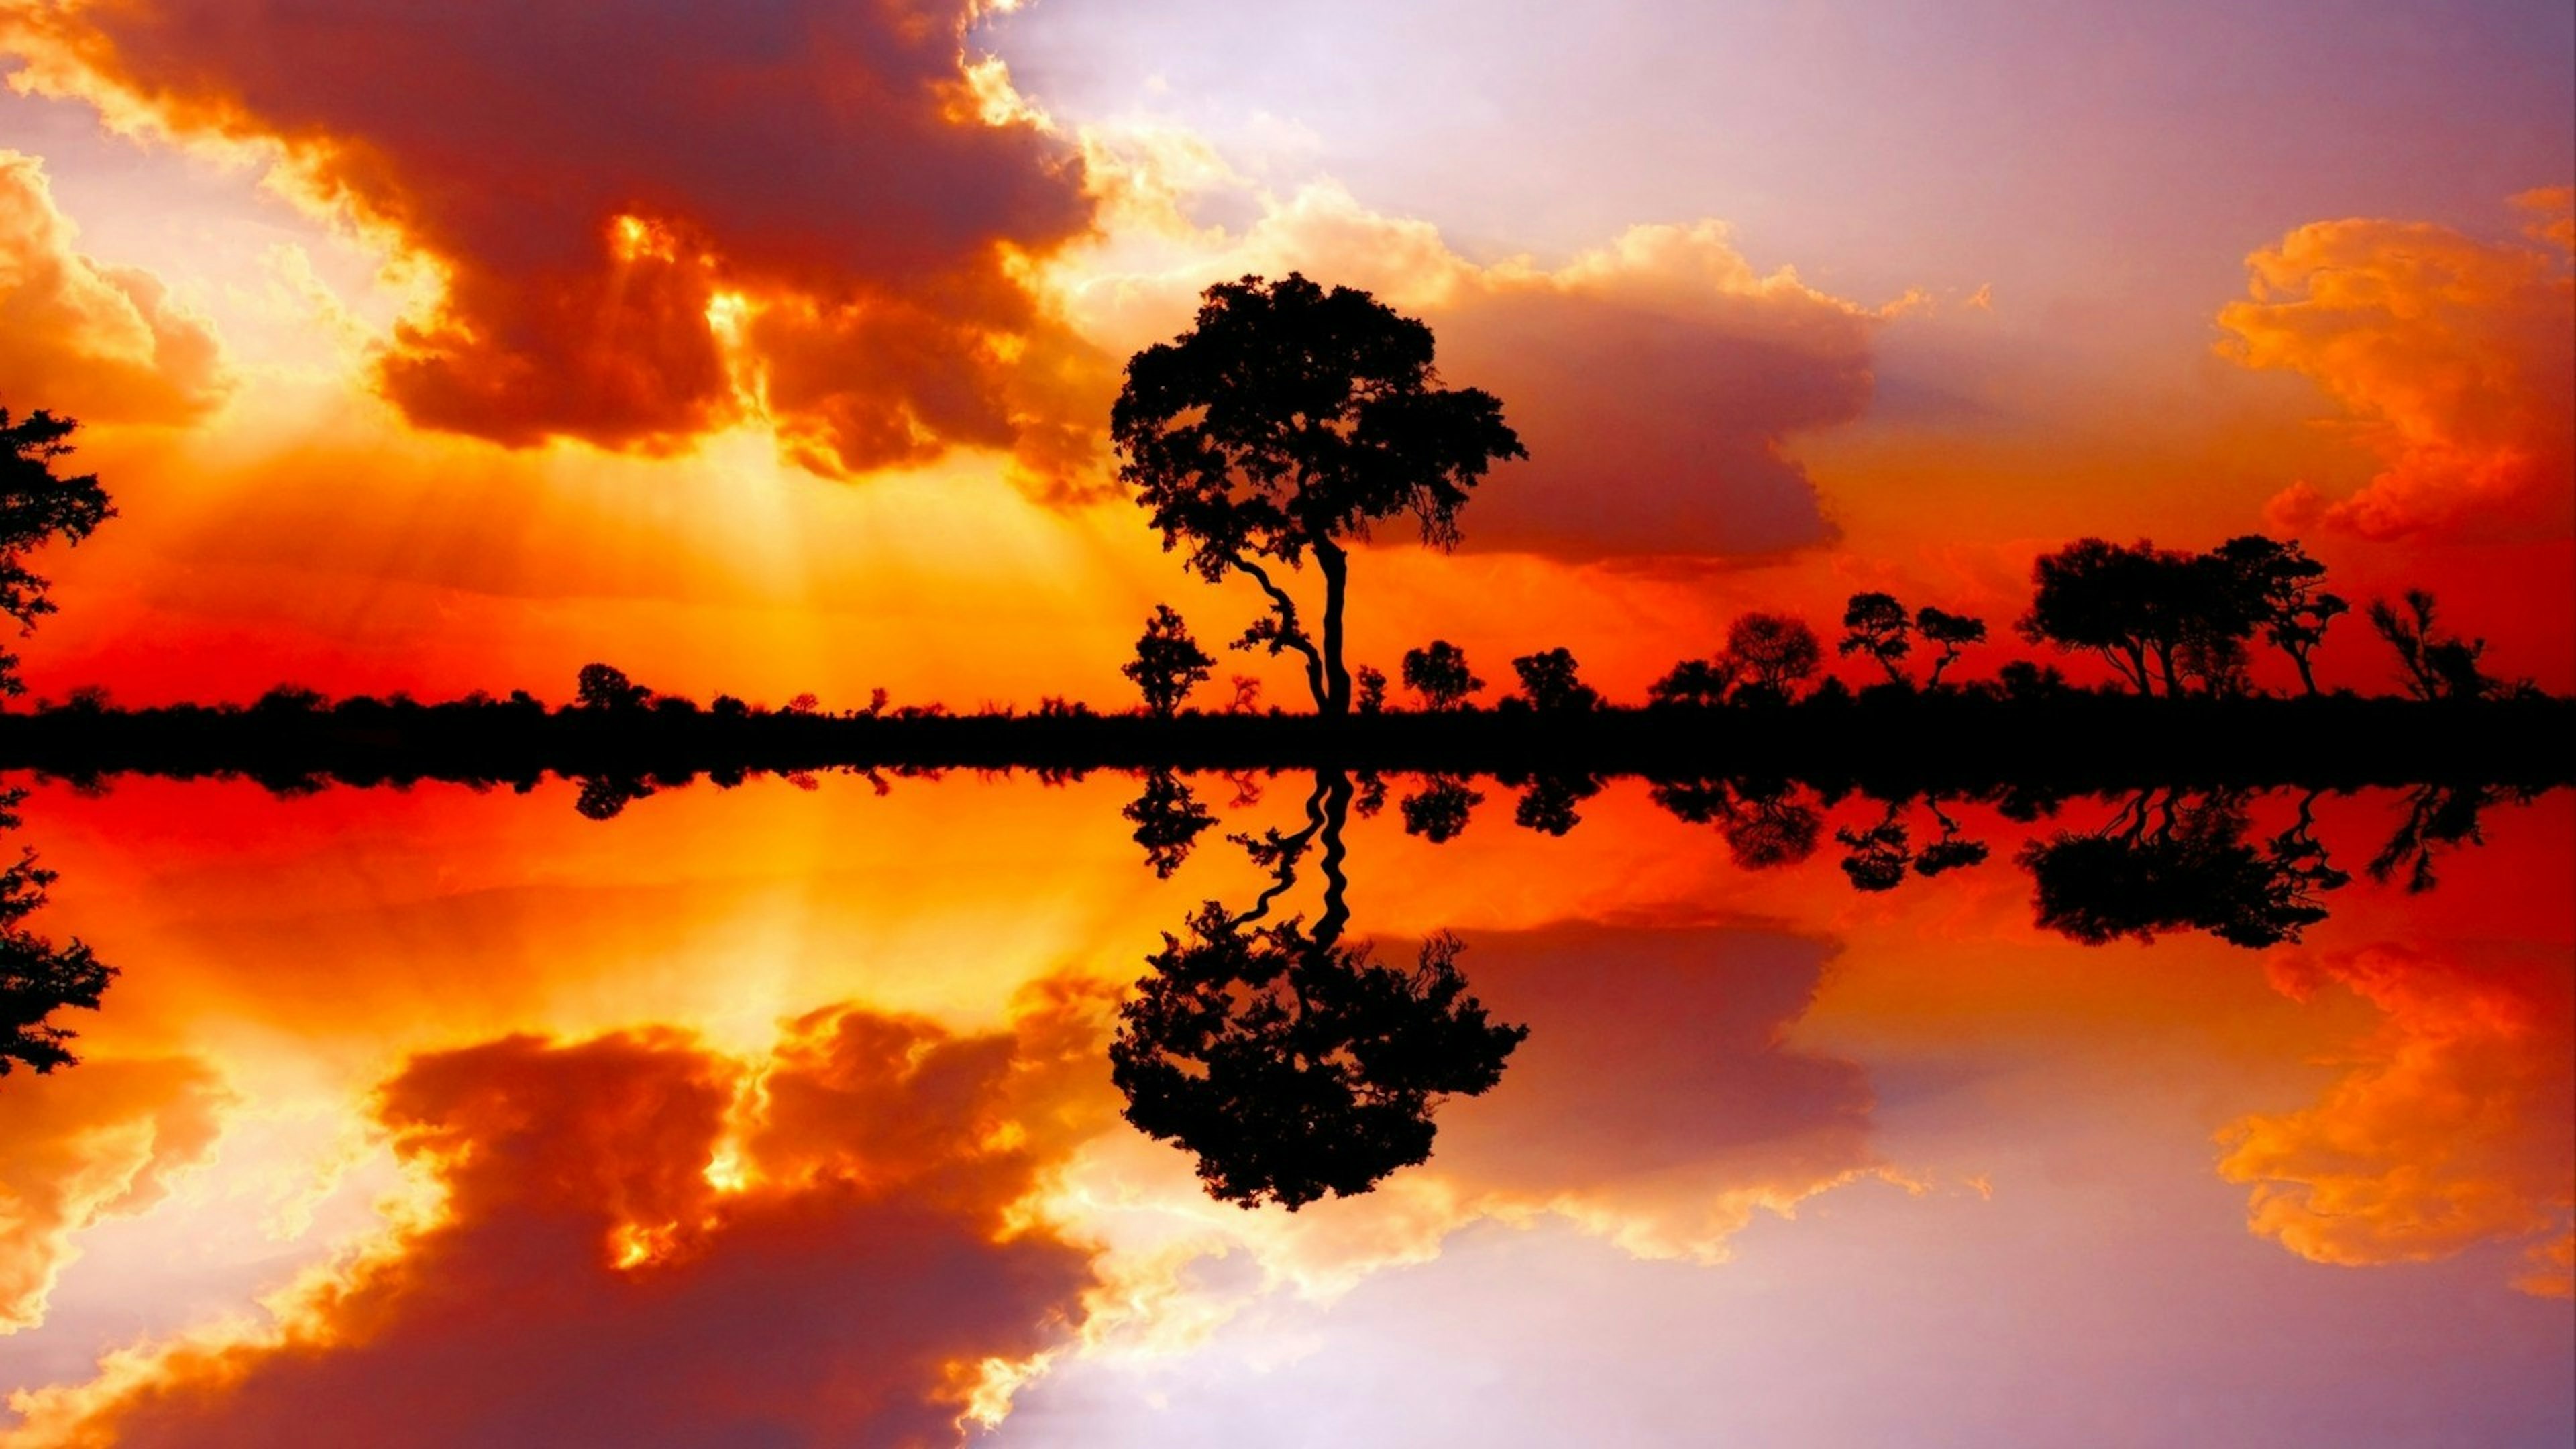 Beautiful African sunset reflected in water, in the Kruger National Park, South Africa